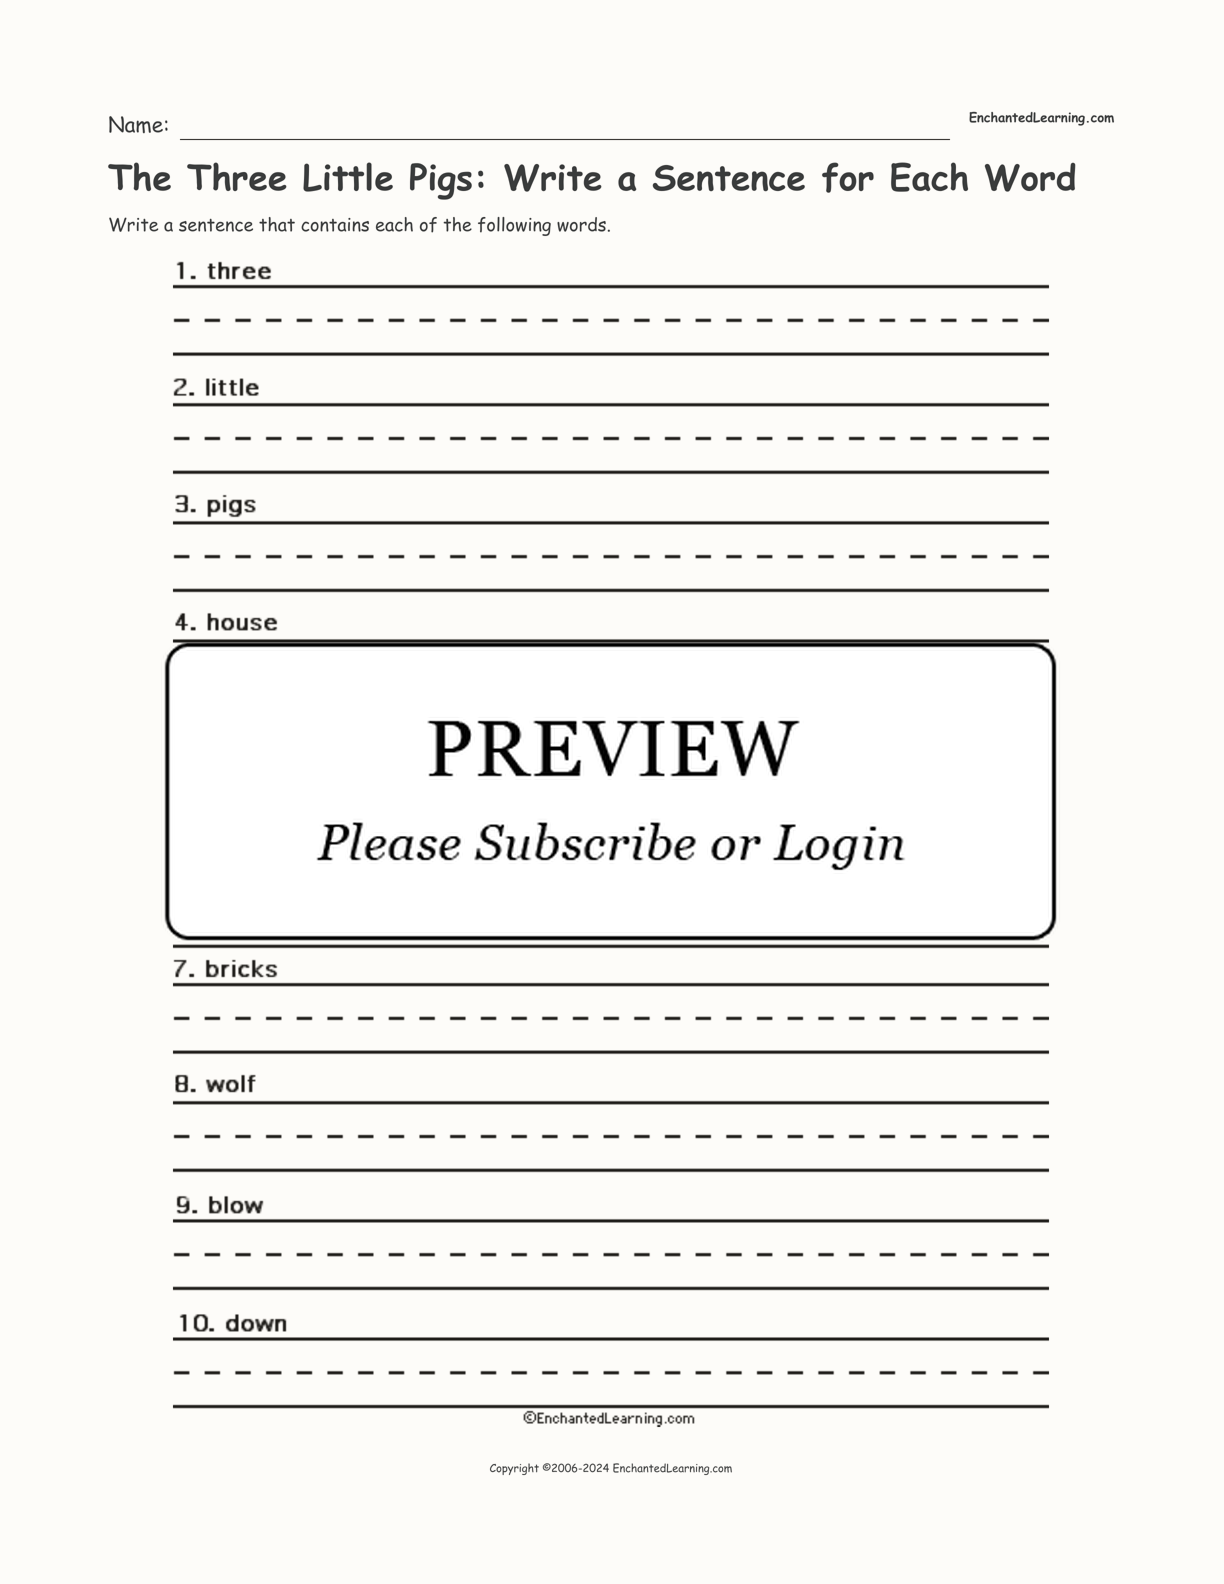 The Three Little Pigs: Write a Sentence for Each Word interactive worksheet page 1